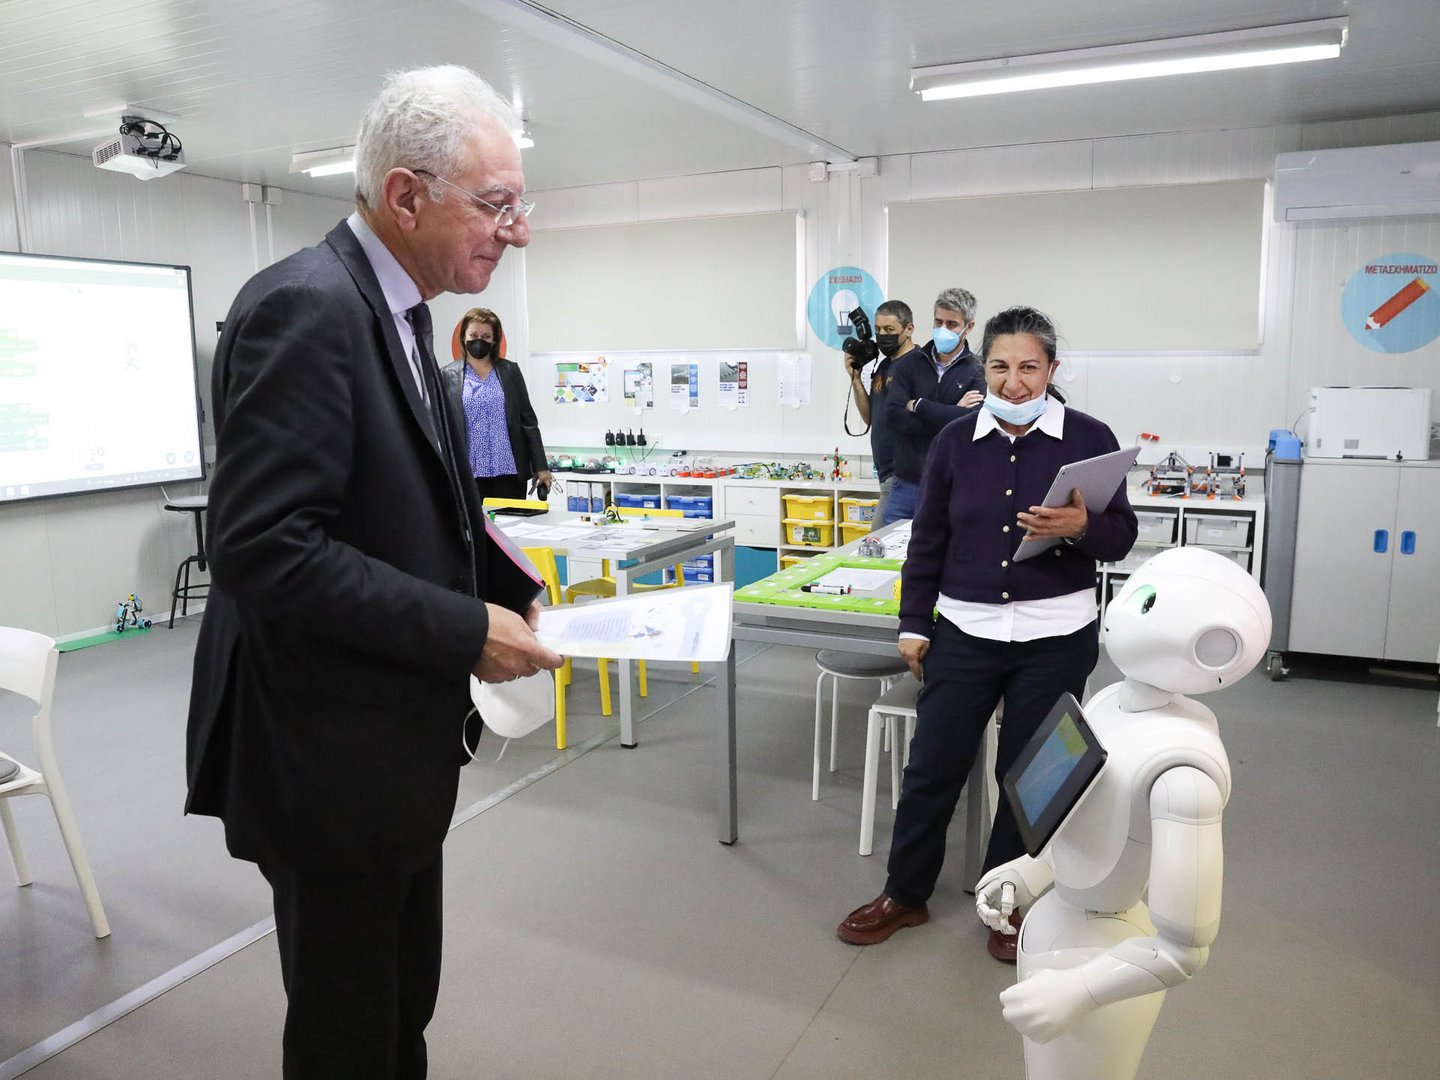 image Education minister praises tech innovations as he meets robots